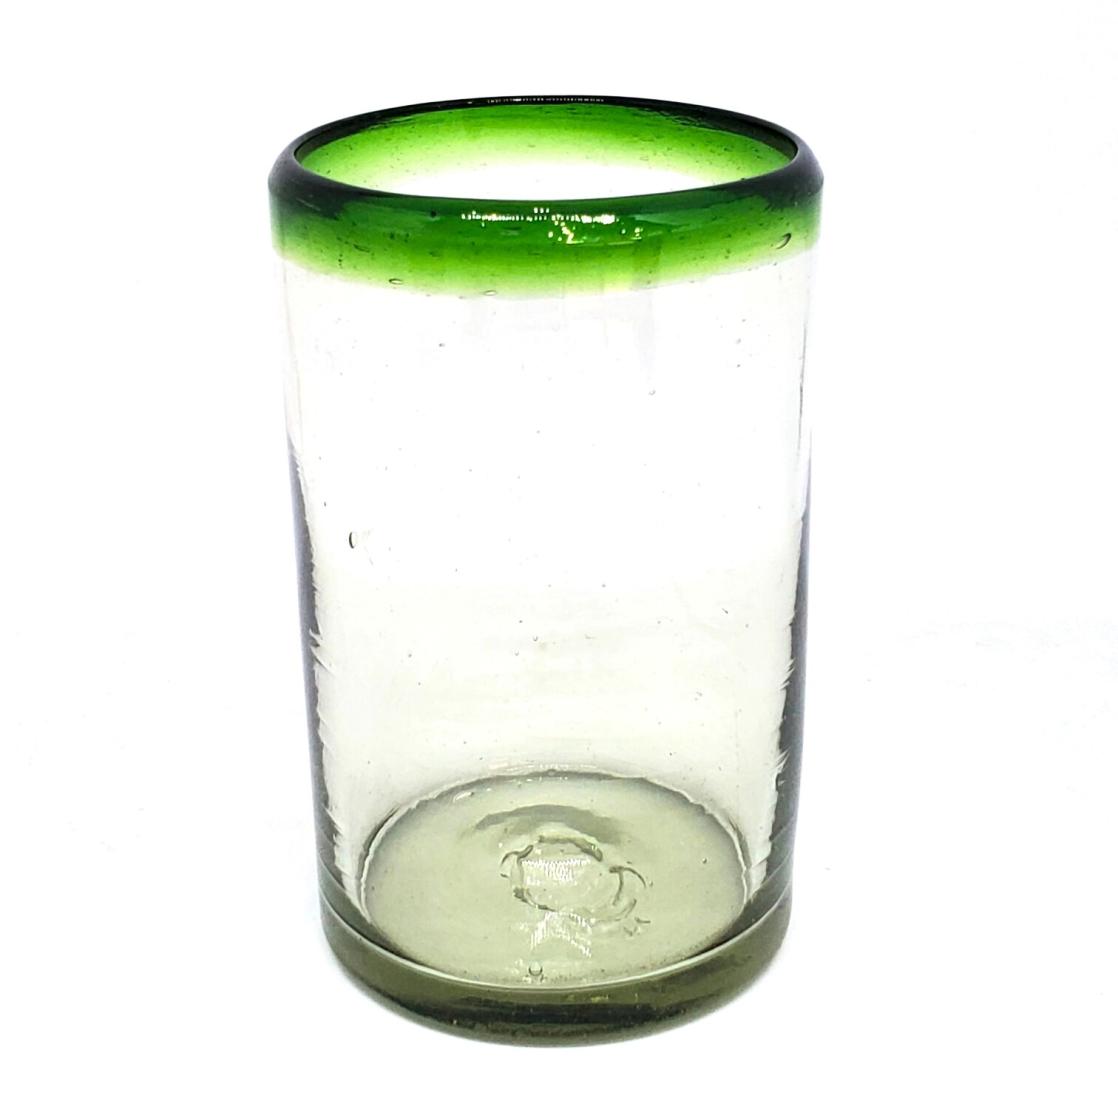 Colored Rim Glassware / Emerald Green Rim 14 oz Drinking Glasses (set of 6) / These handcrafted glasses deliver a classic touch to your favorite drink.